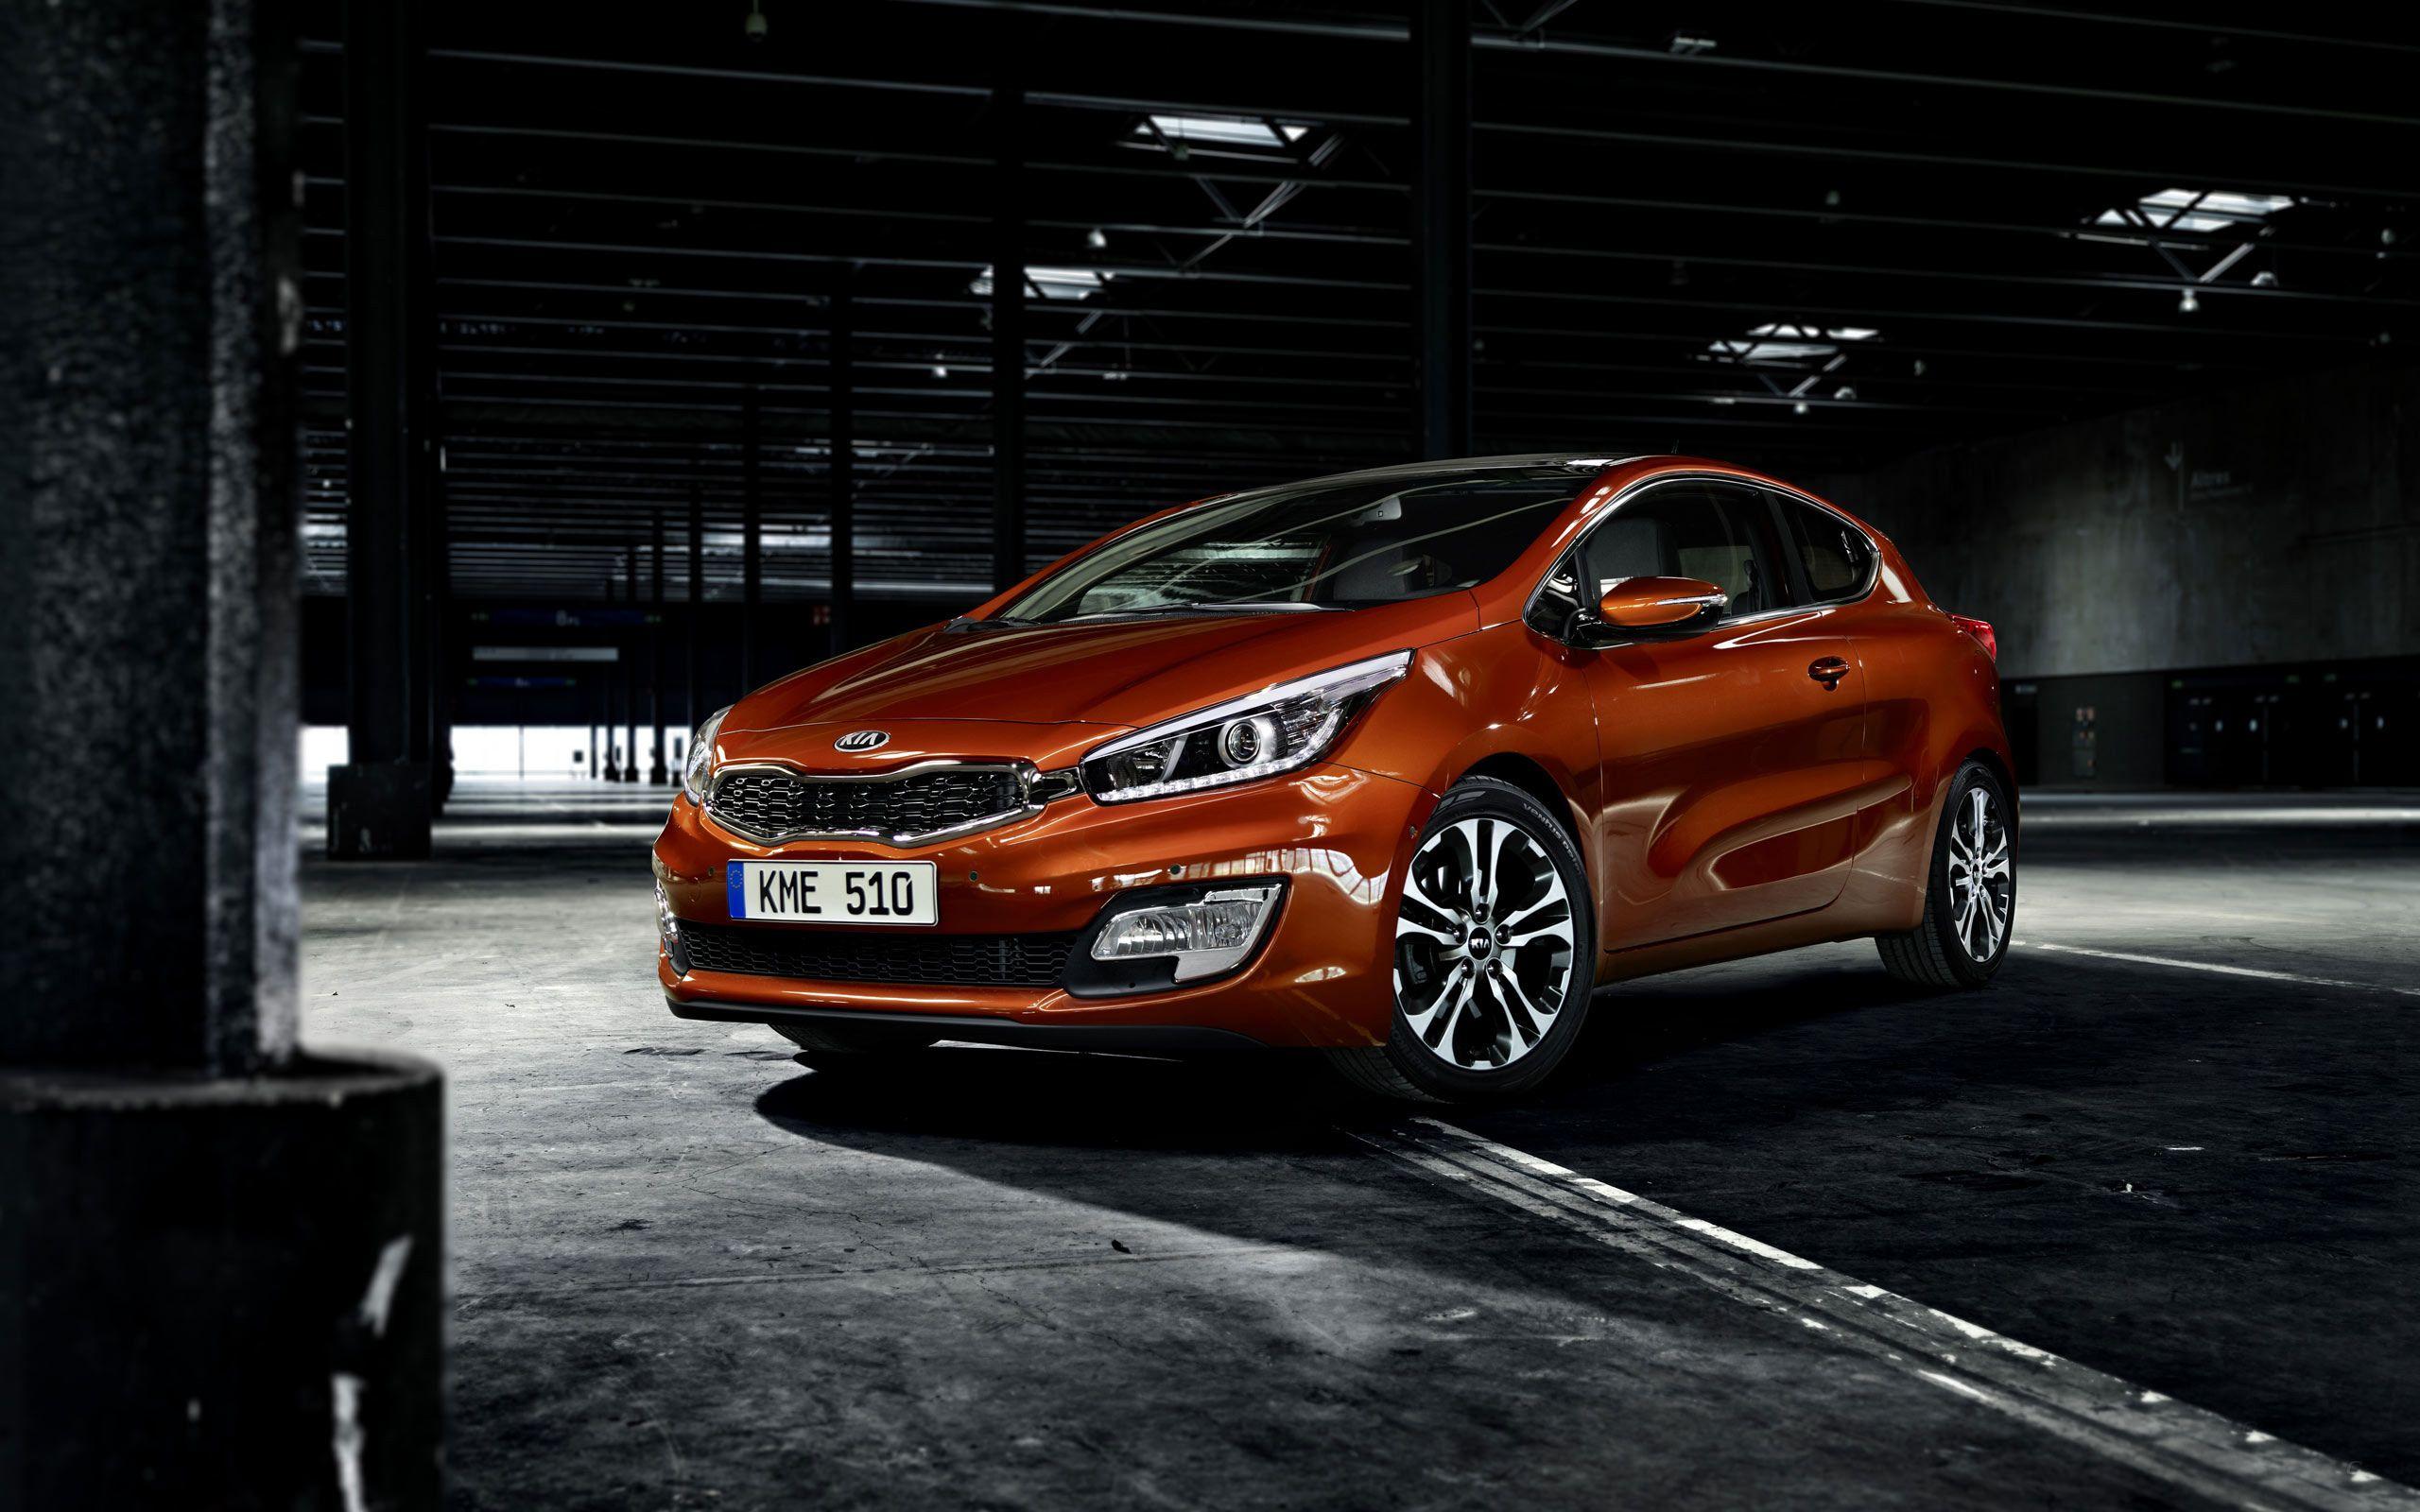 Test drive the car Kia Ceed wallpaper and image